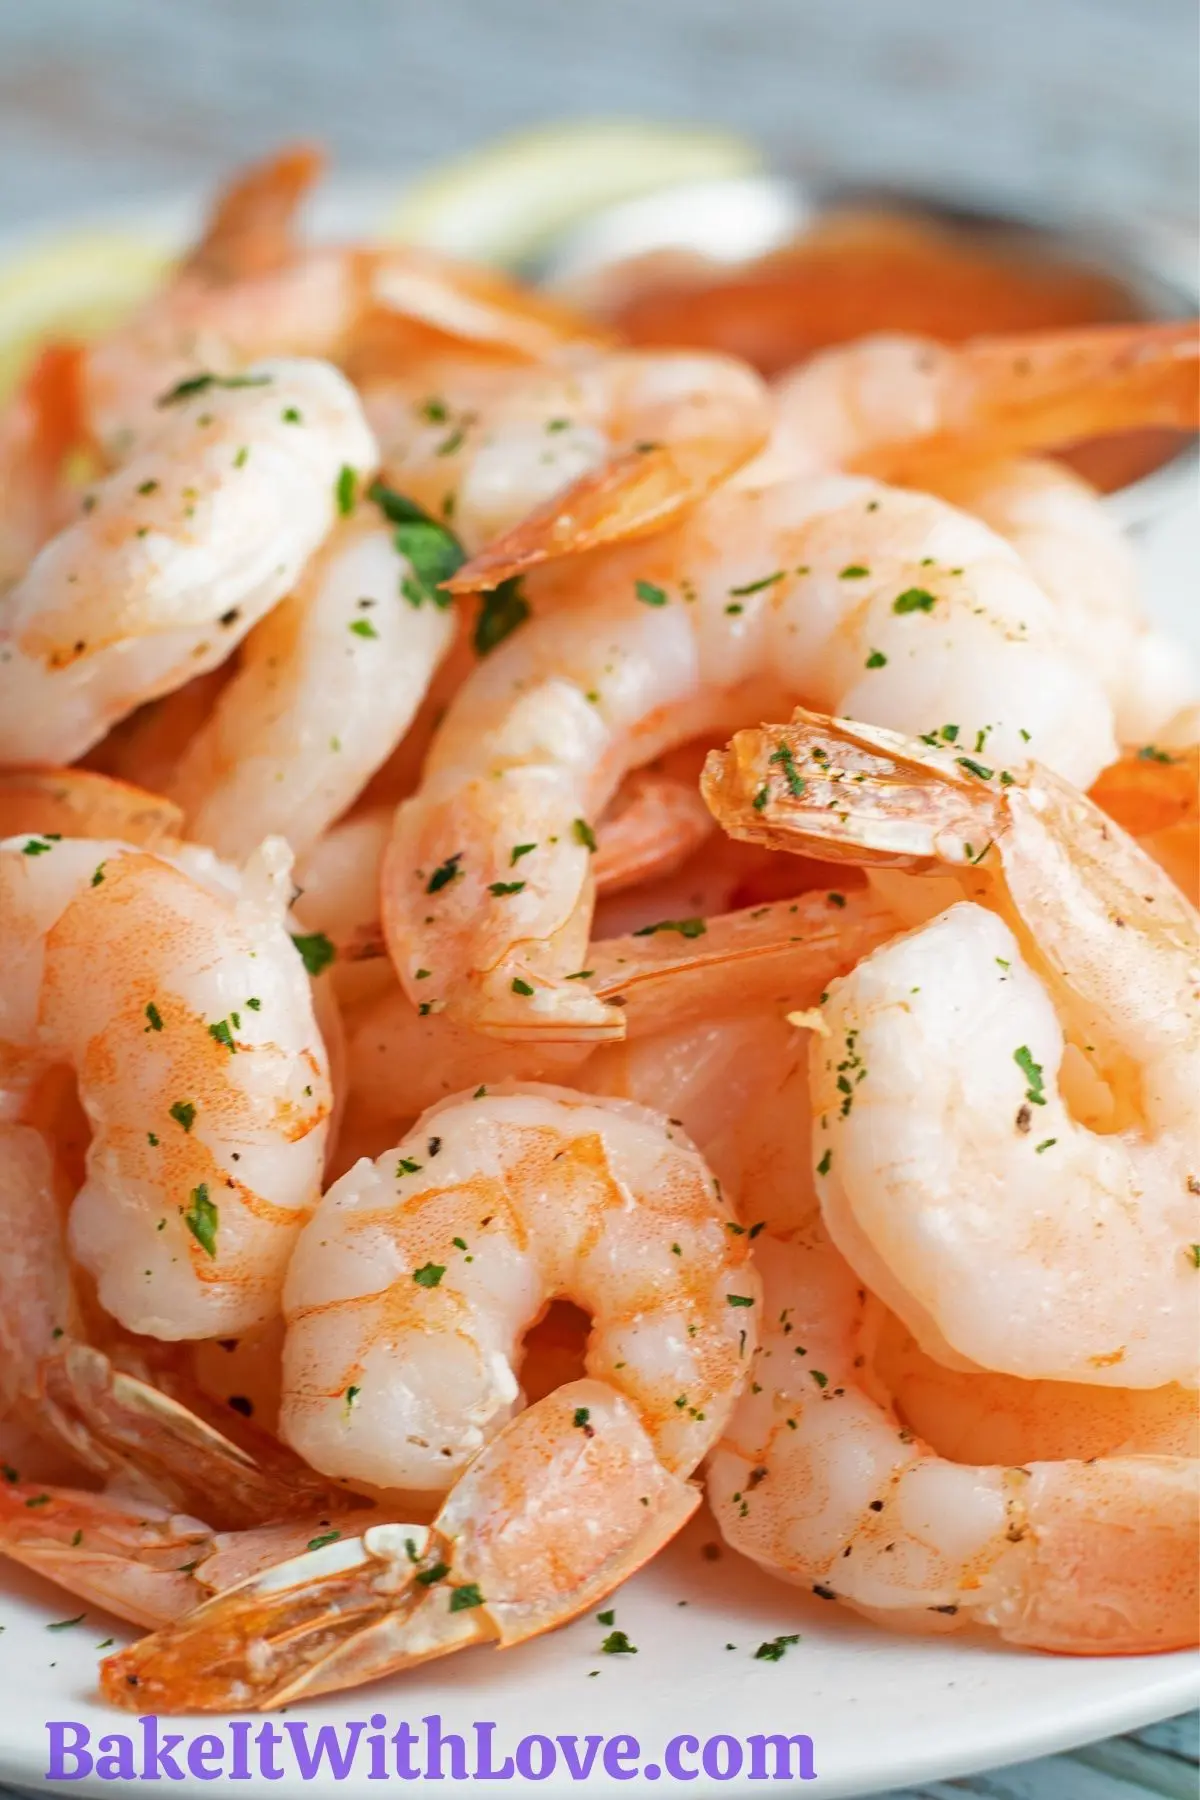 Air fryer shrimp served with lemon wedges and cocktail sauce.